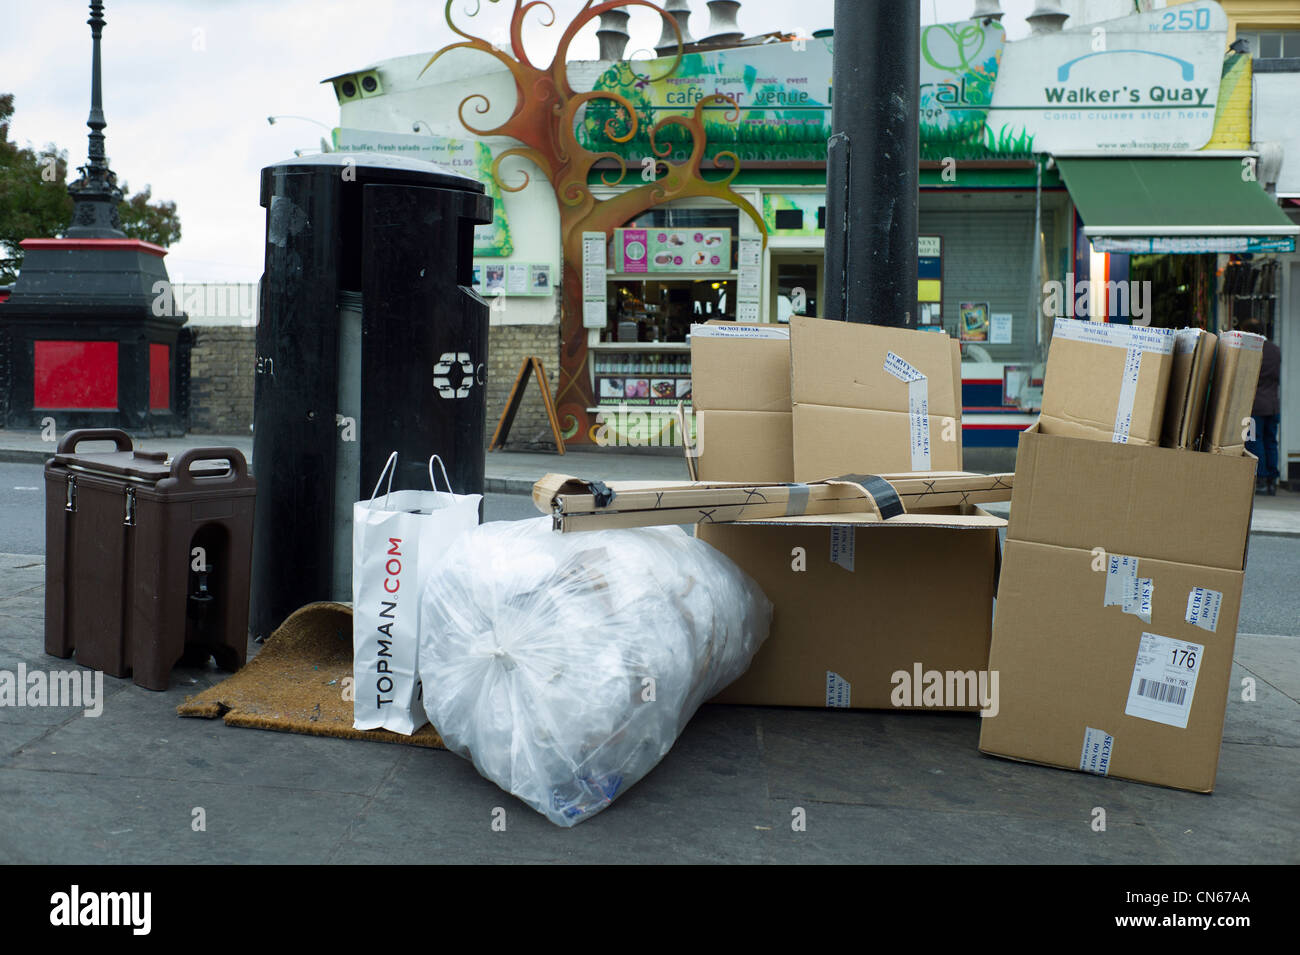 Cardboard boxes and rubbish for recycling, Camden Market, Camden Town, London England Stock Photo